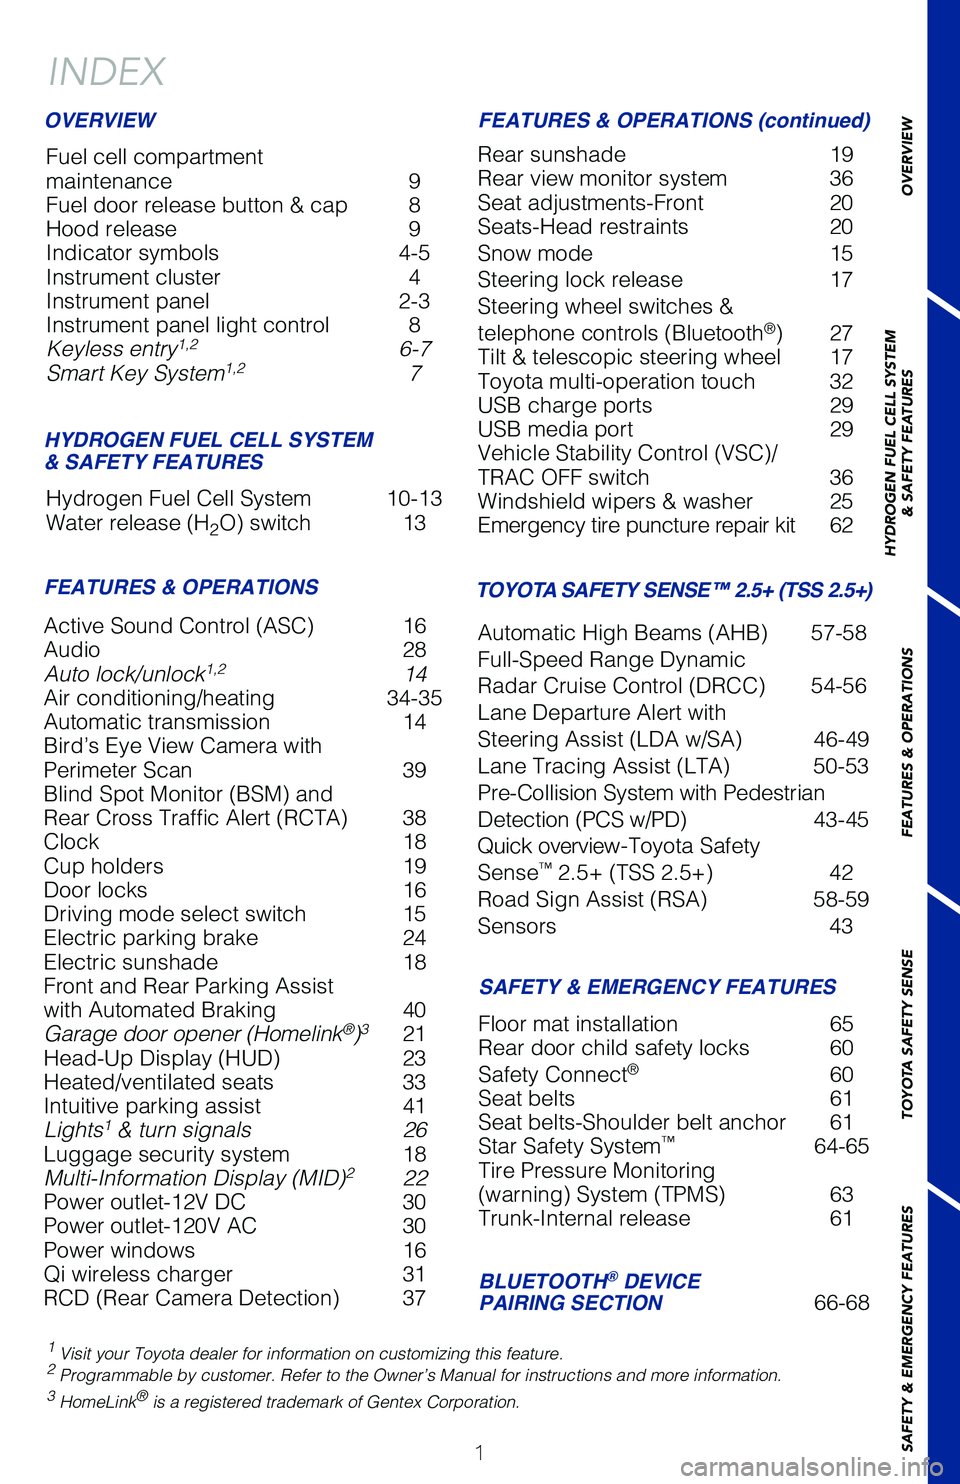 TOYOTA MIRAI 2021  Owners Manual (in English) 1
OVERVIEW
HYDROGEN FUEL CELL SYSTEM
& SAFETY FEATURES
FEATURES & OPERATIONS
TOYOTA SAFETY SENSE
SAFETY & EMERGENCY FEATURES
Active Sound Control (ASC)  16 
Audio  28 
Auto lock/unlock
1,2  14
Air con